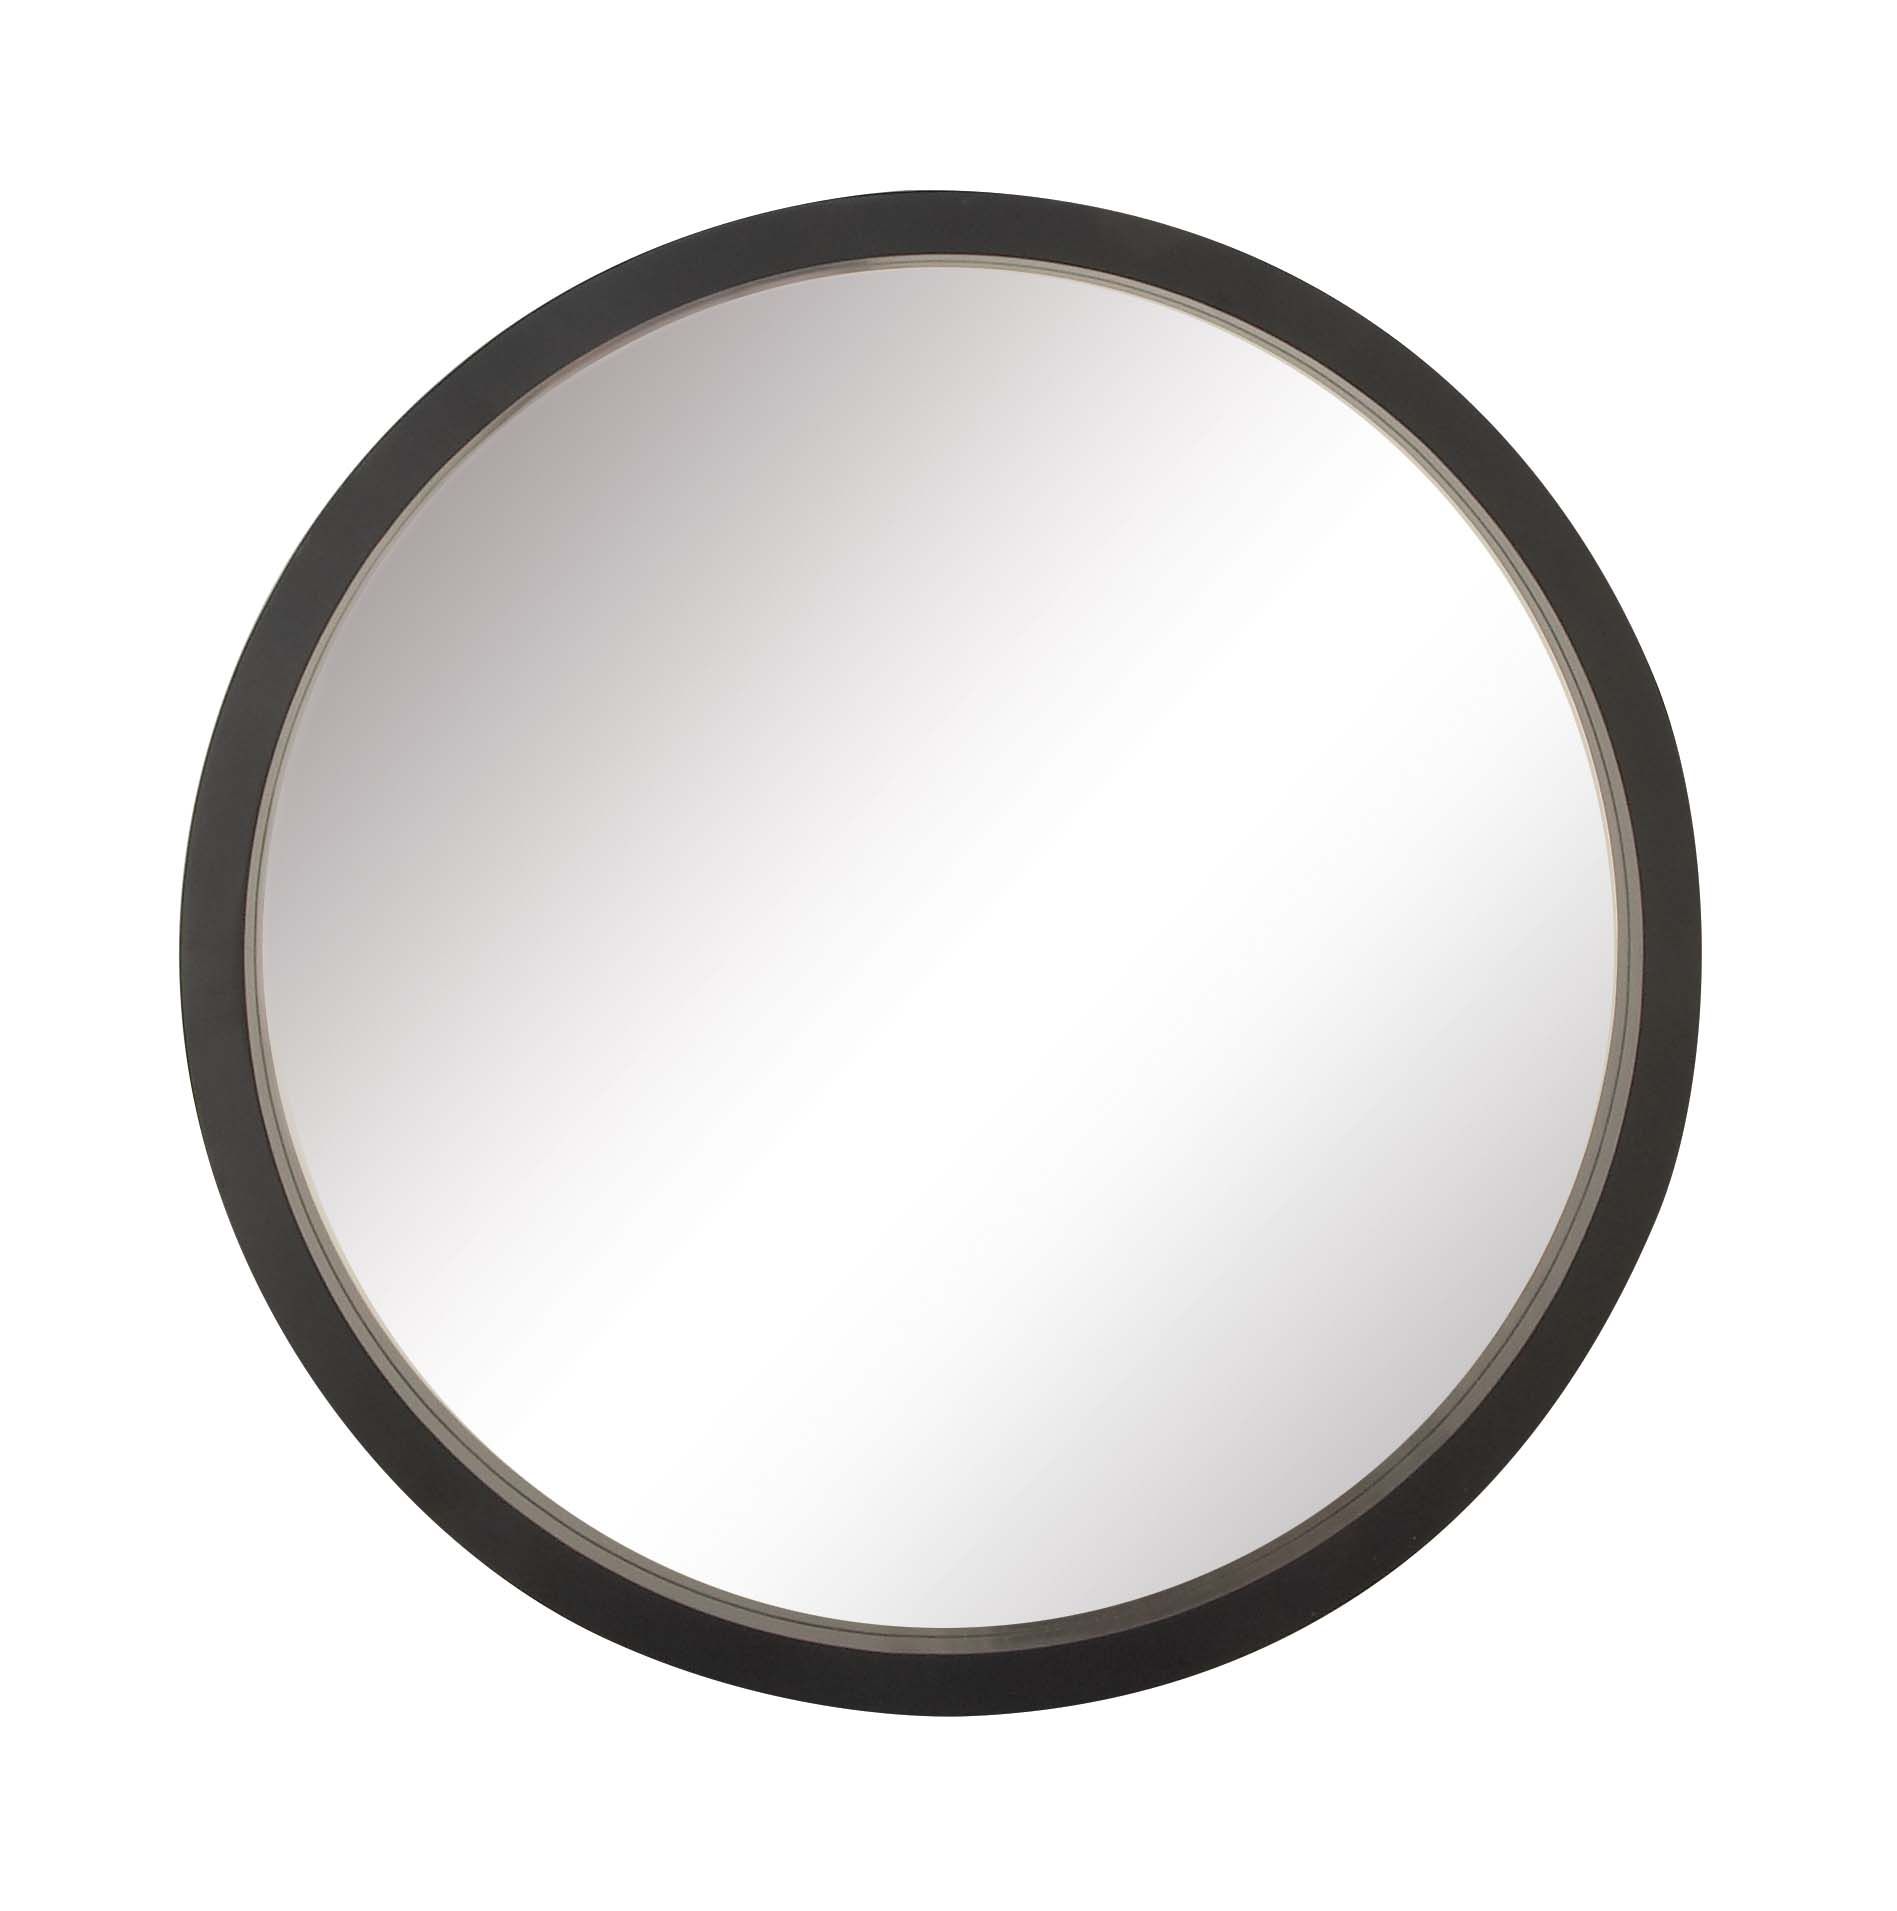 Decmode 32 Inch Contemporary Wooden Framed Round Wall Mirror, Black In Round Stacked Wall Mirrors (View 11 of 15)